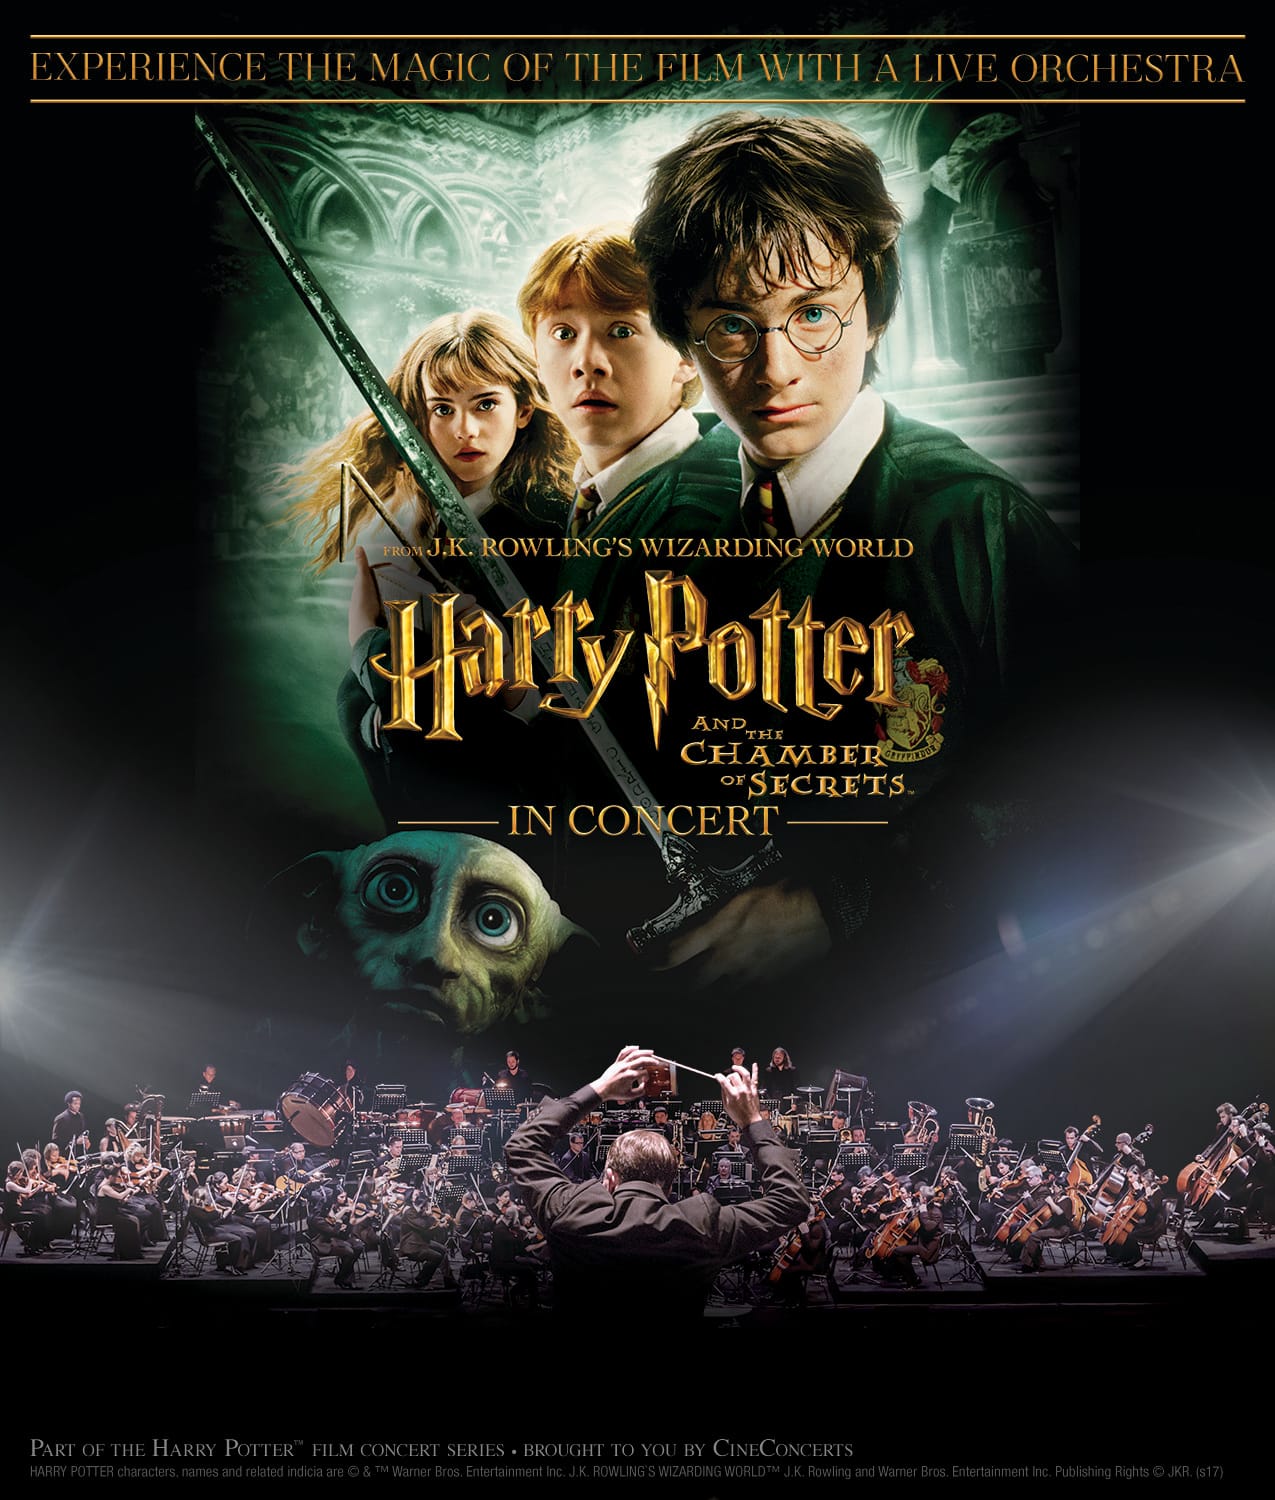 âHarry Potter and the Chamber of Secretsâ featuring live score by SoNA ...